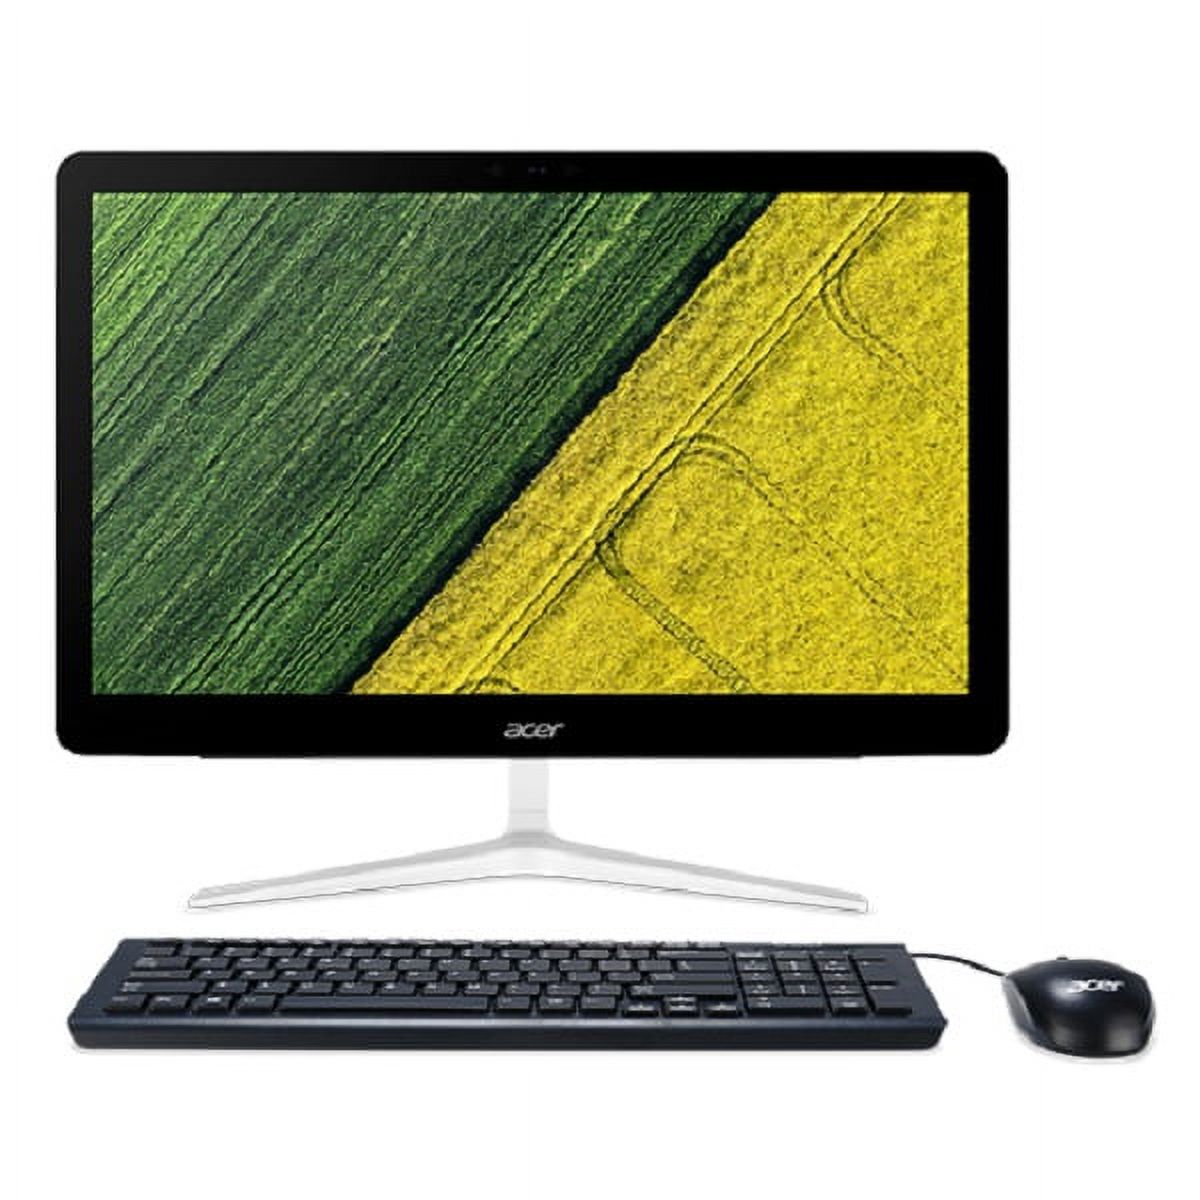 Acer Aspire Z24-880-UR12 Intel Core i3 7th Gen 7100T (3.40 GHz) 6 GB DDR4 1 TB HDD 23.8" Touchscreen Windows 10 Home All-in-One - image 1 of 7